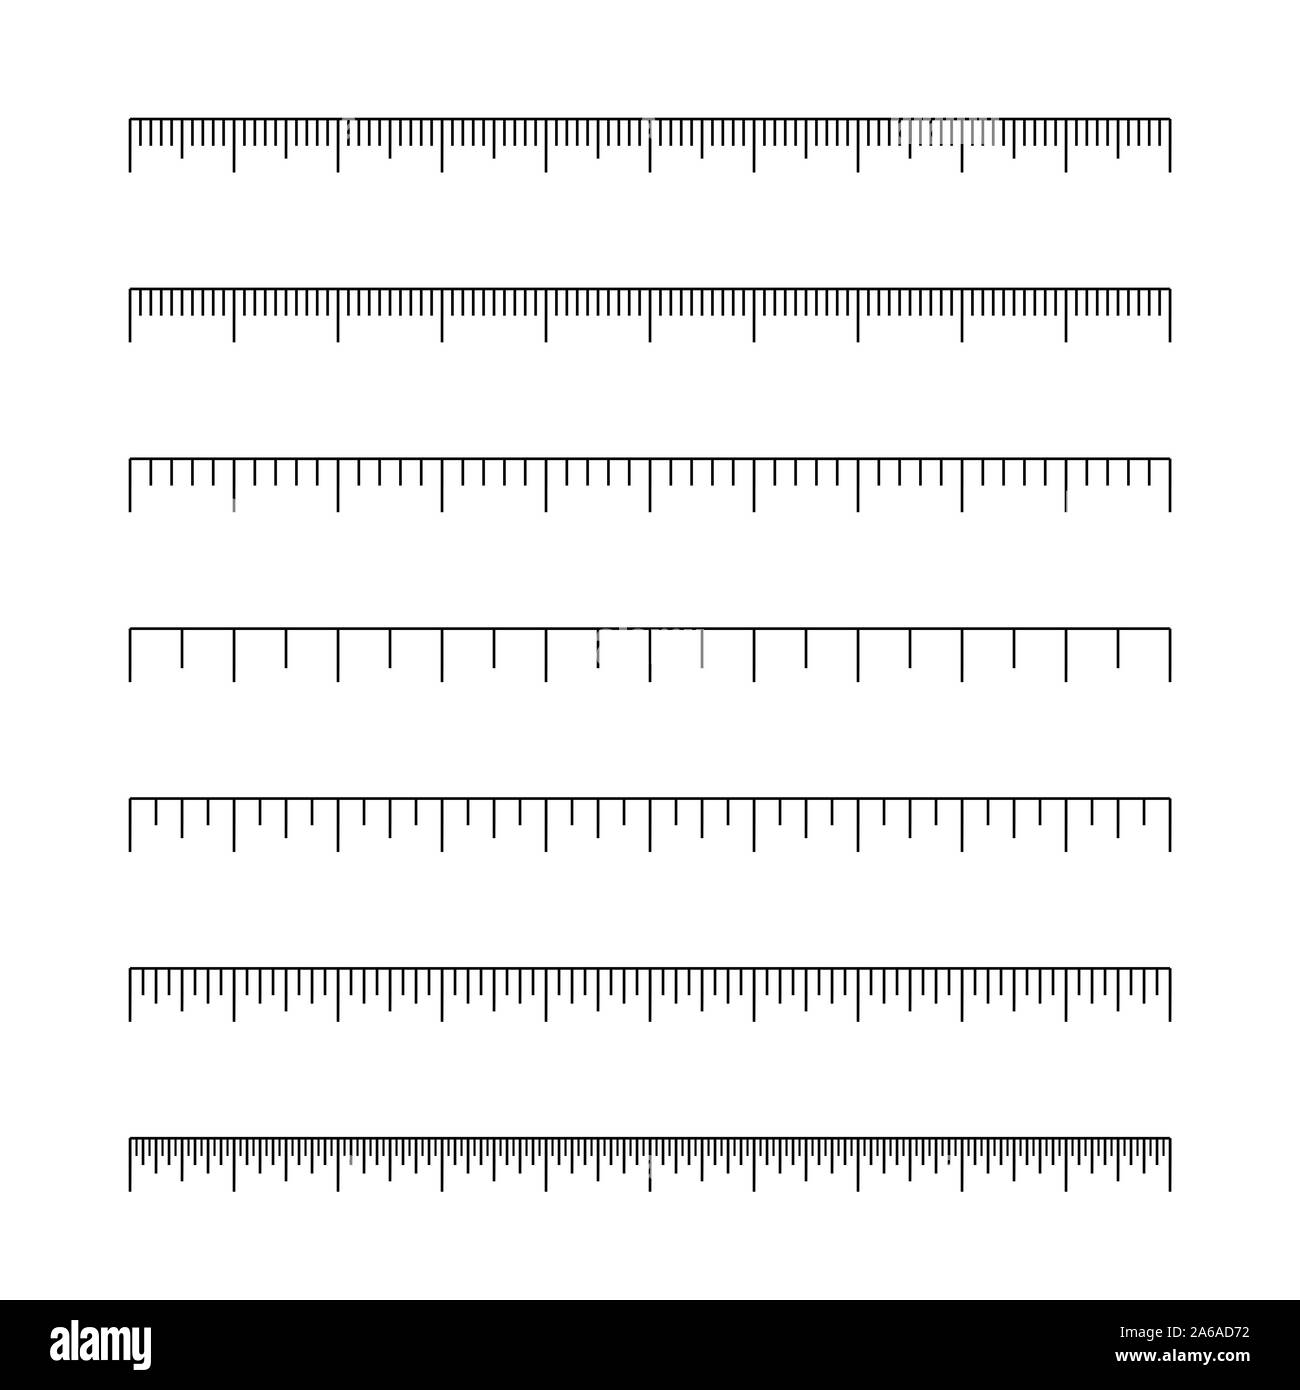 https://c8.alamy.com/comp/2A6AD72/set-of-ruler-inches-and-cm-scale-template-for-measure-tool-2A6AD72.jpg